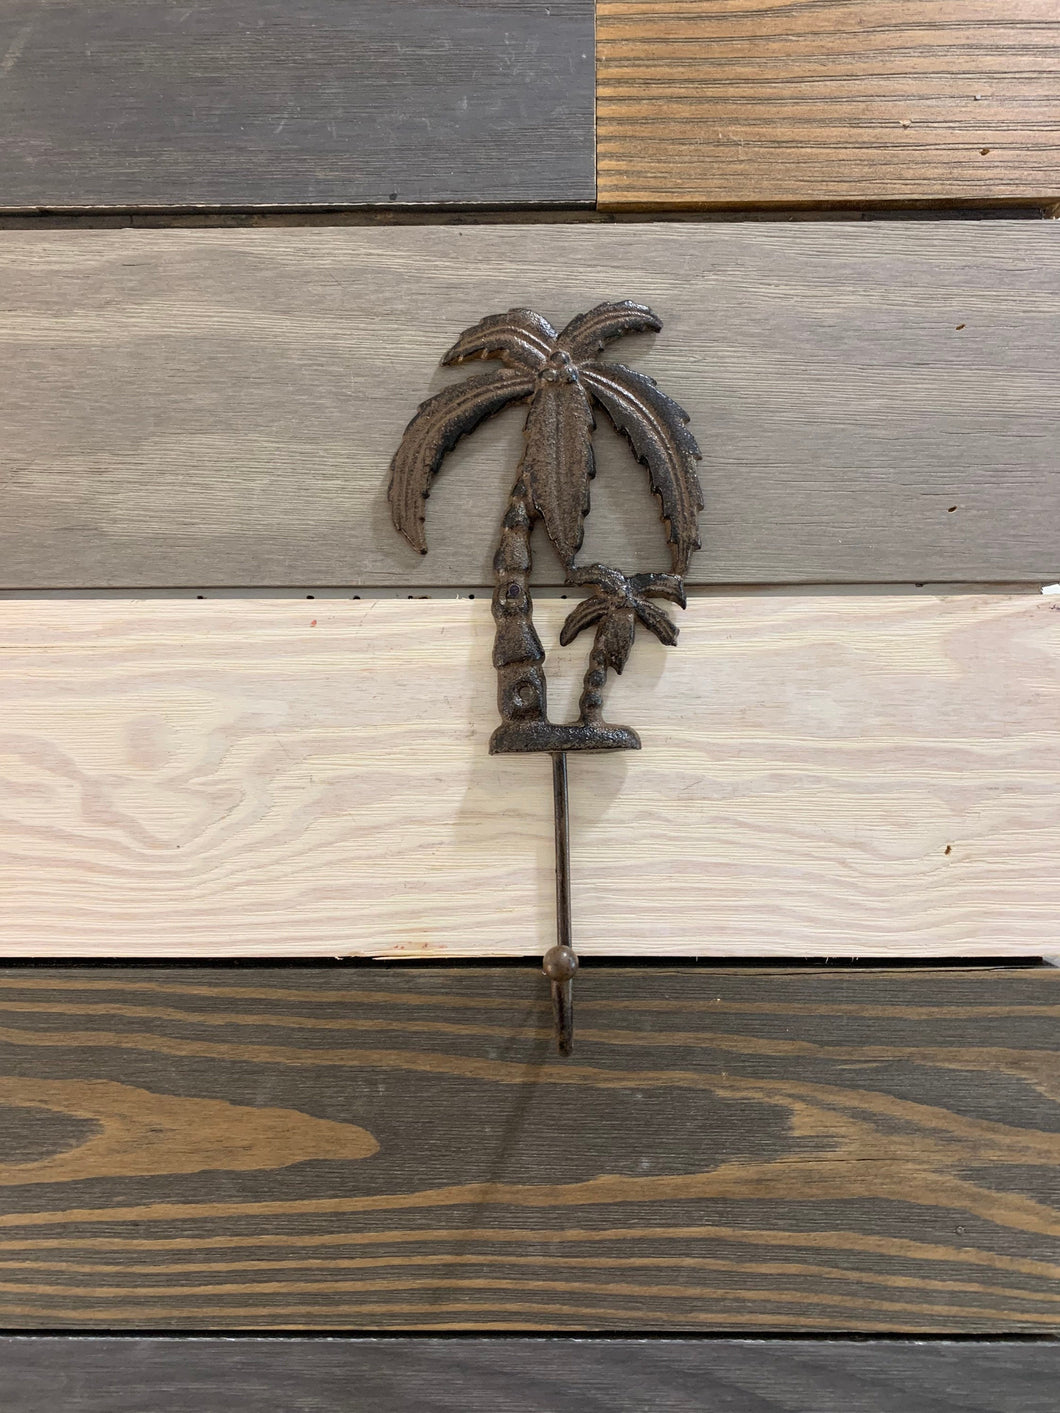 Cast Iron Palm Tree, Beach Palm Bedroom Wall Hanger Coatroom Organizer, Outdoor Space Saver, Storage System, Wall Hanging, Beach Decor, Gift